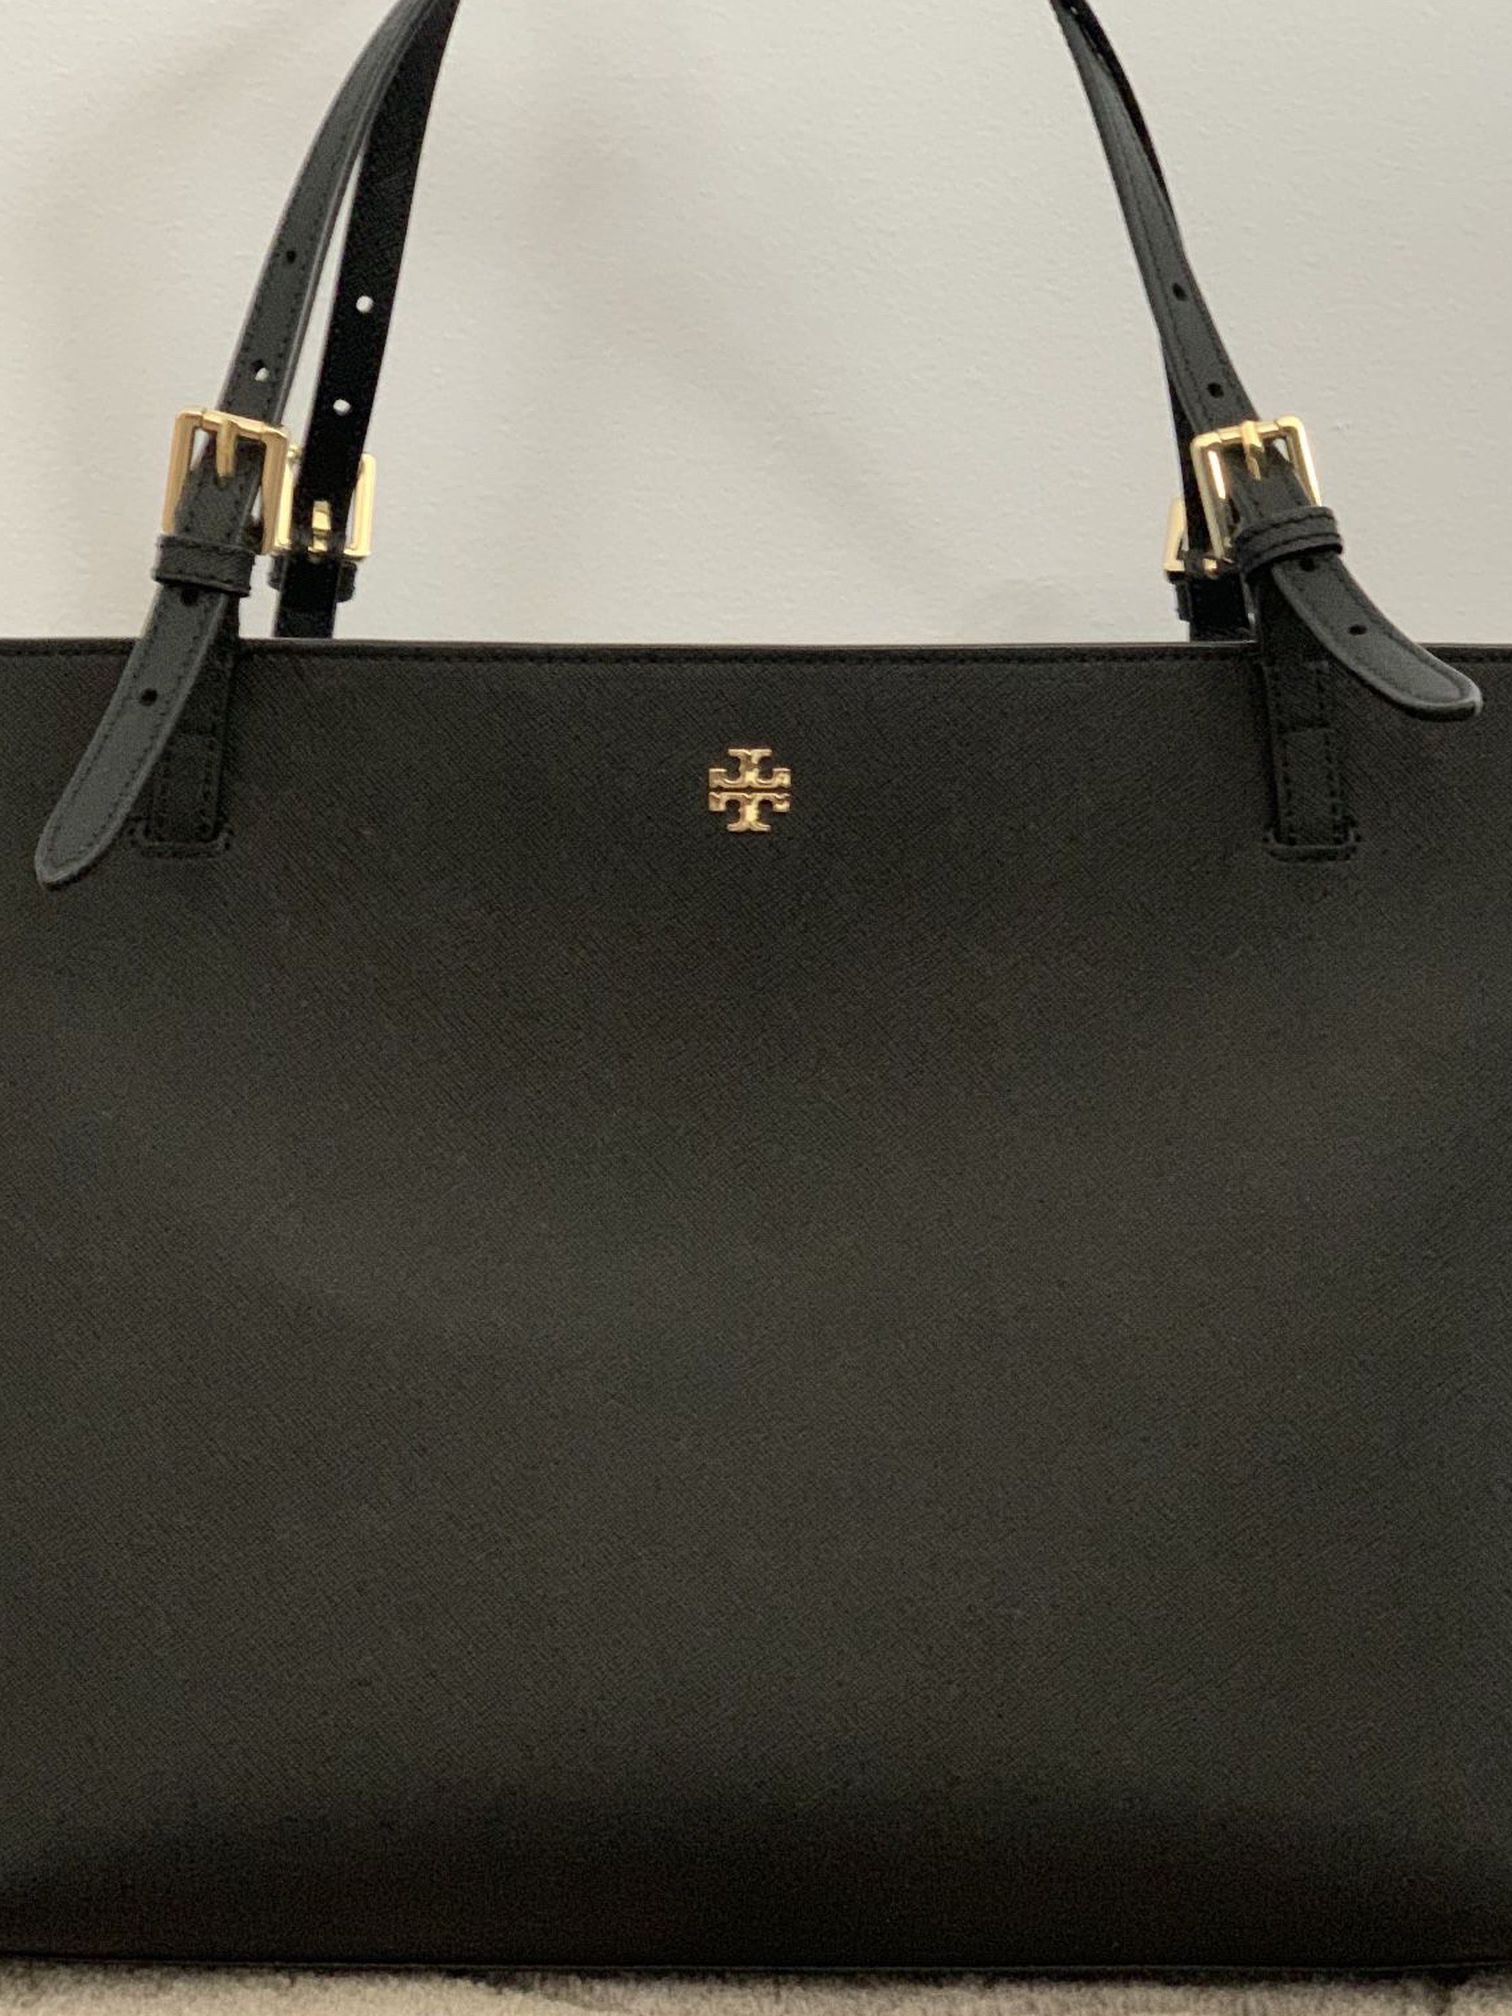 Tory Burch Black Leather York Tote - Large